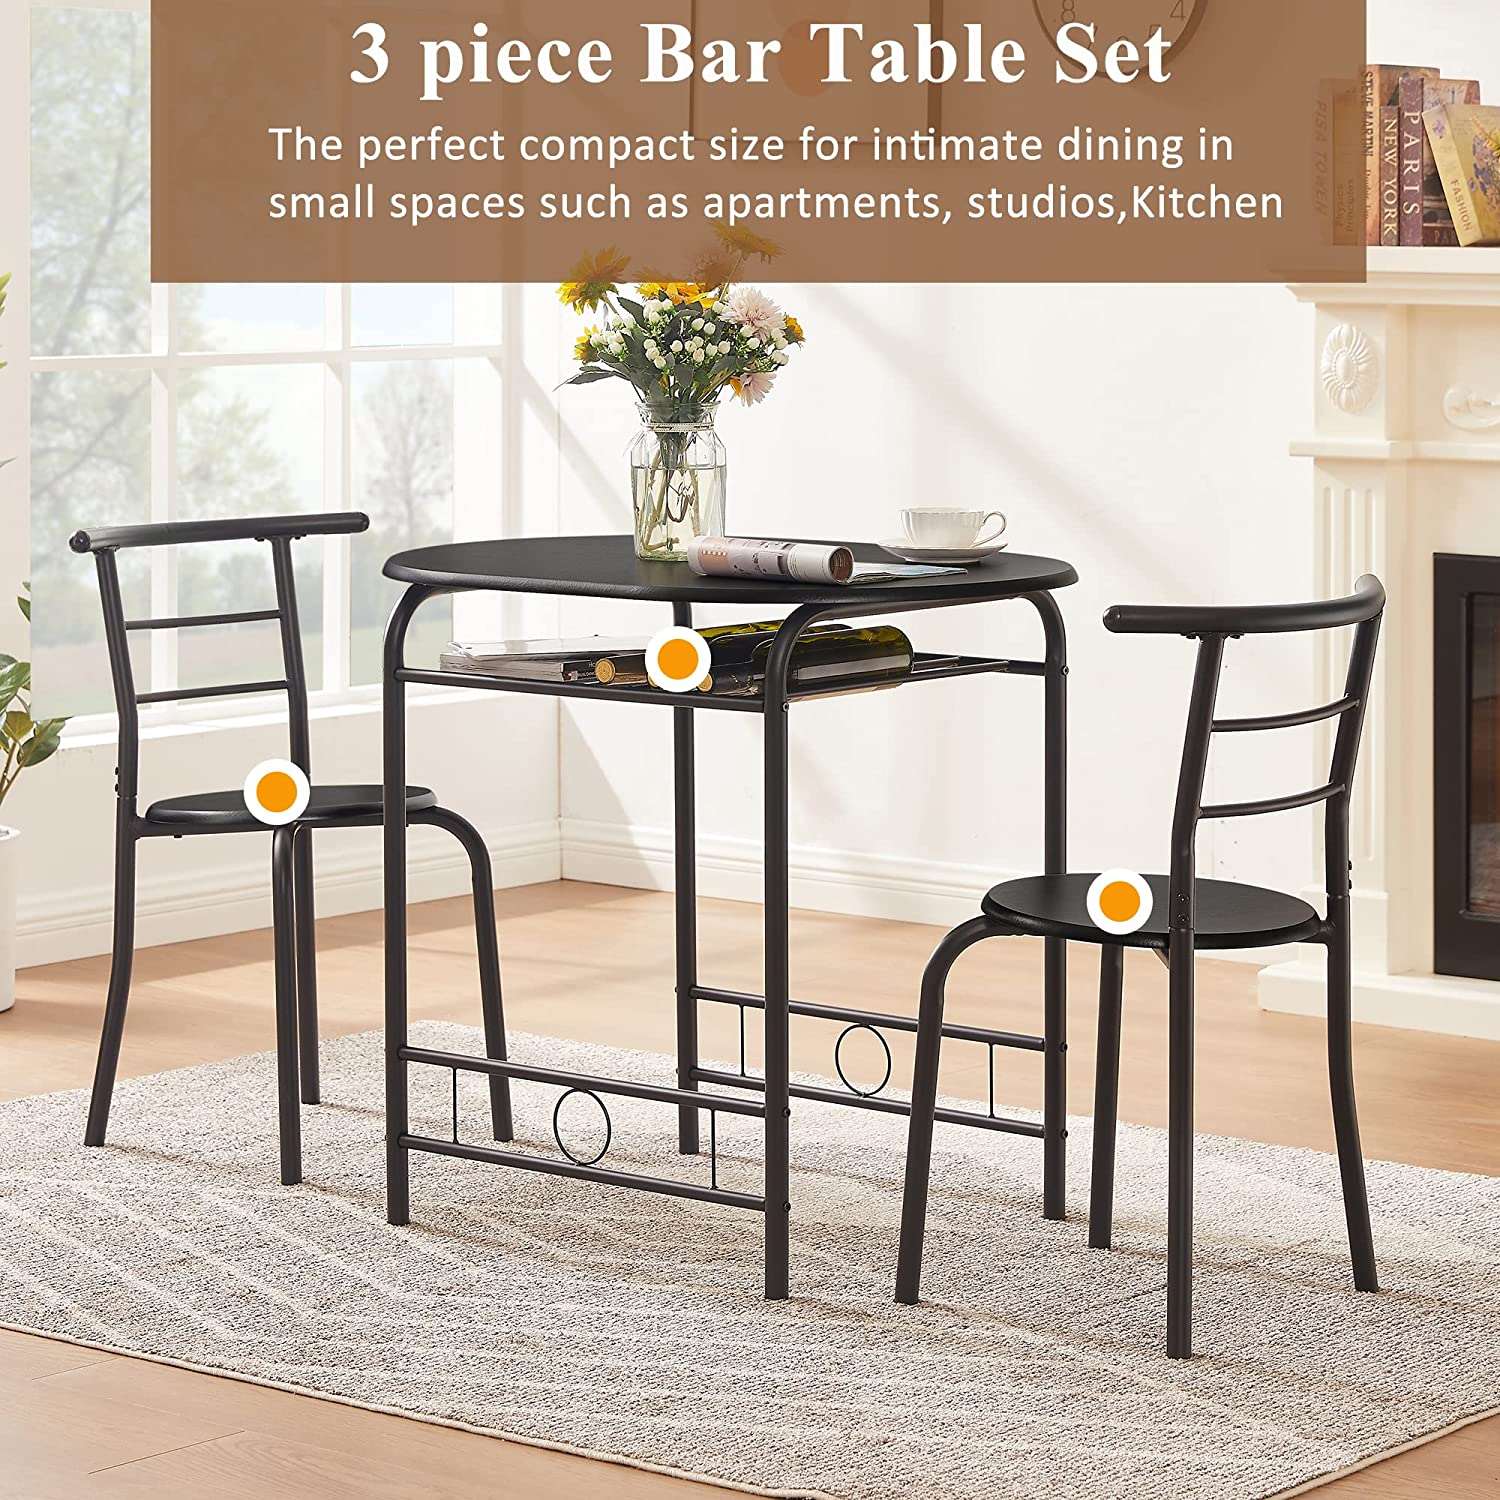 VECELO 3 Piece Small Round Dining Table Set for Kitchen Breakfast Nook, Wood Grain Tabletop with Wine Storage Rack